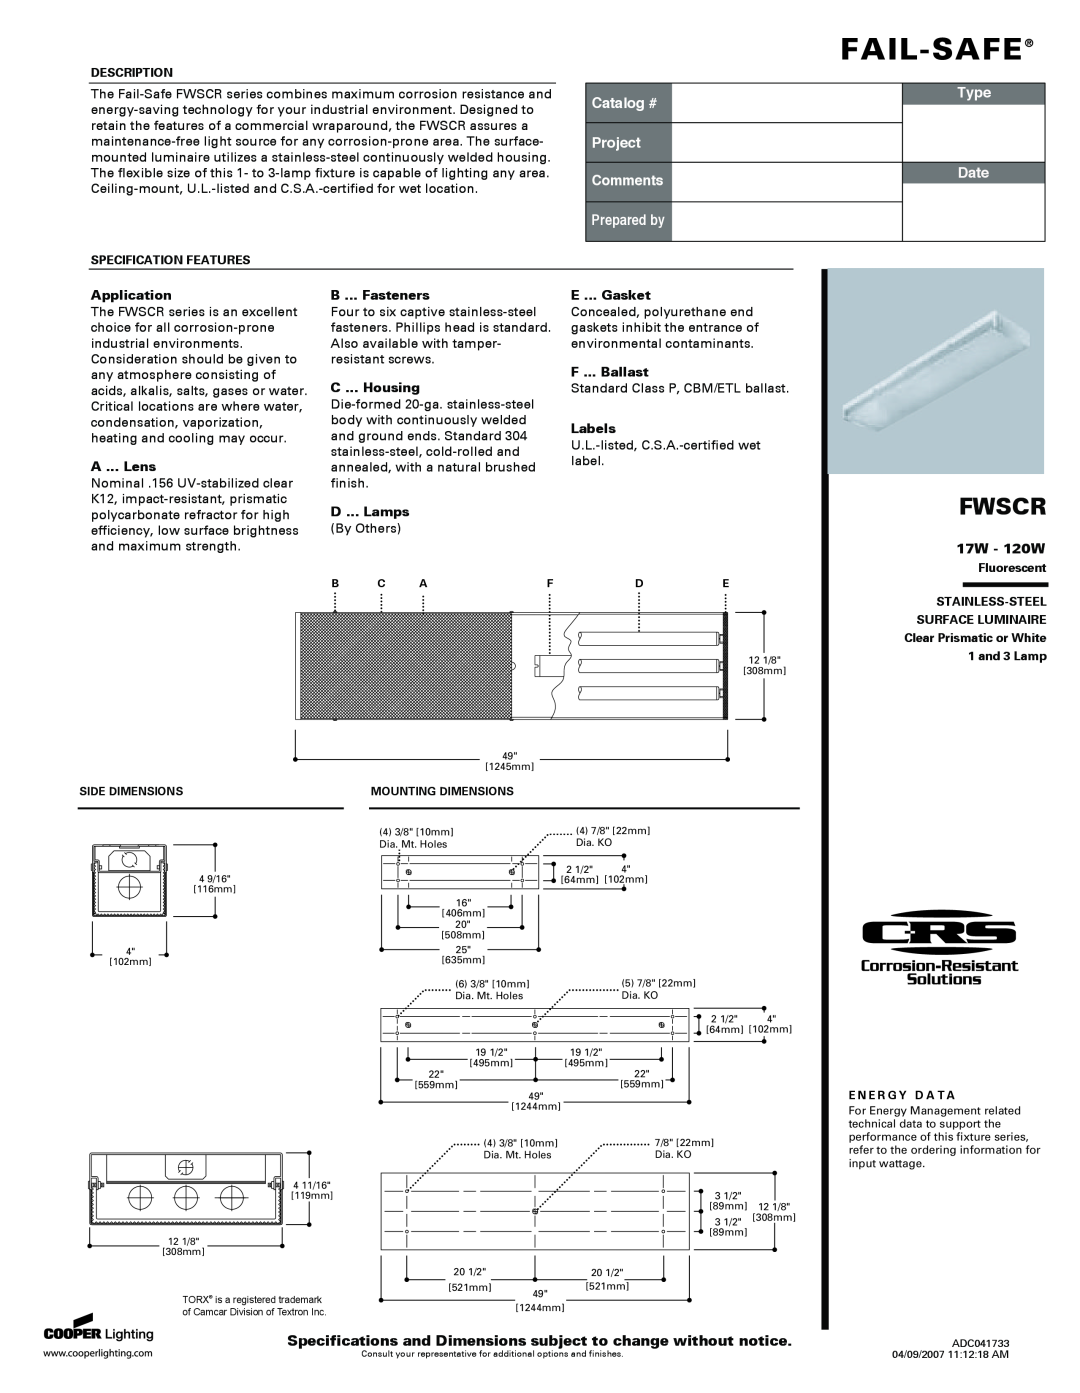 Cooper Lighting FWSCR specifications 17W - 120W, Application, A ... Lens, B ... Fasteners, C ... Housing, D ... Lamps 